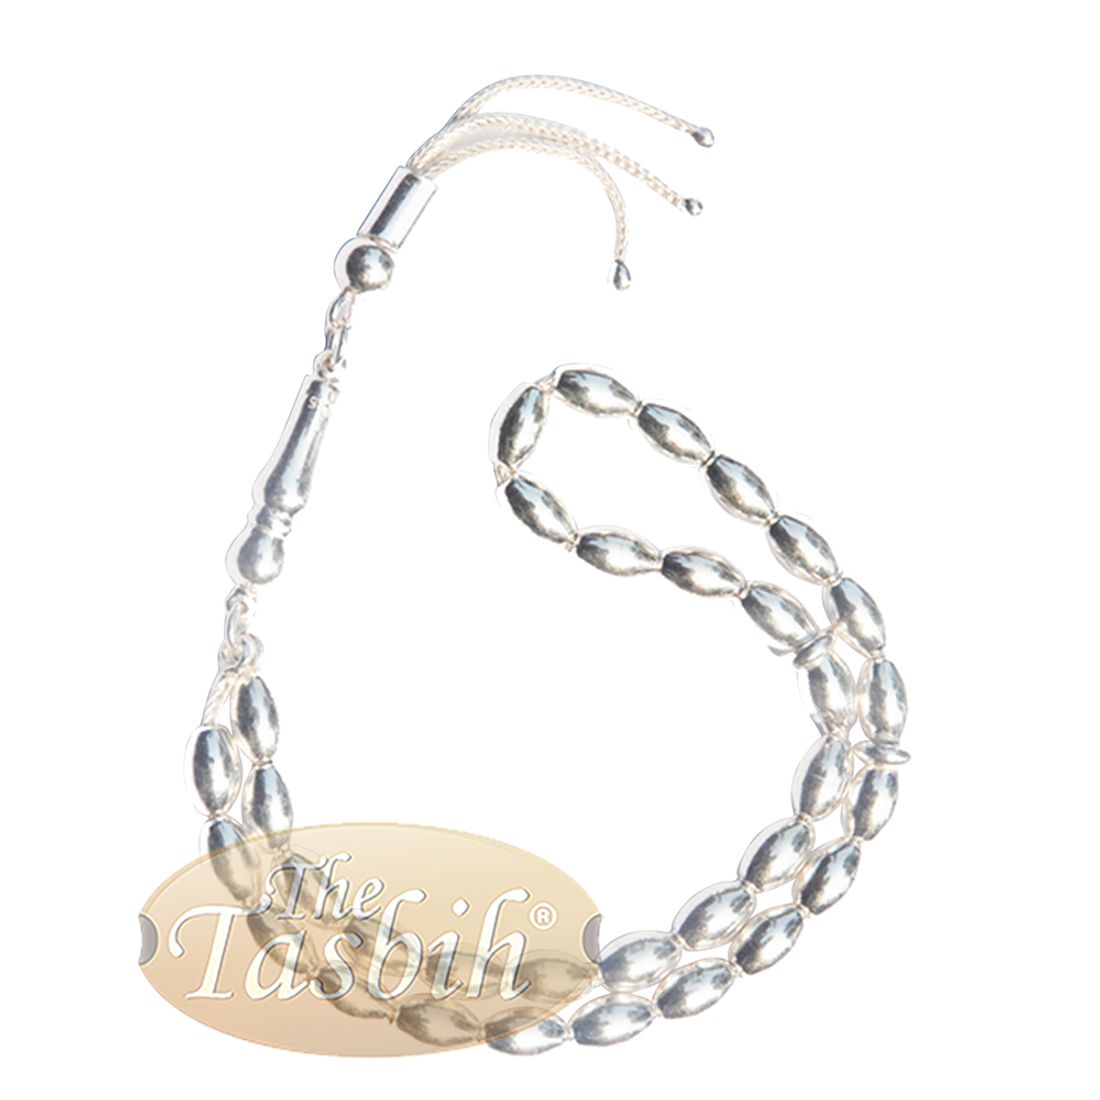 5mm Sterling Silver Prayer Beads 33 Elongated Oval Beads with Dividers